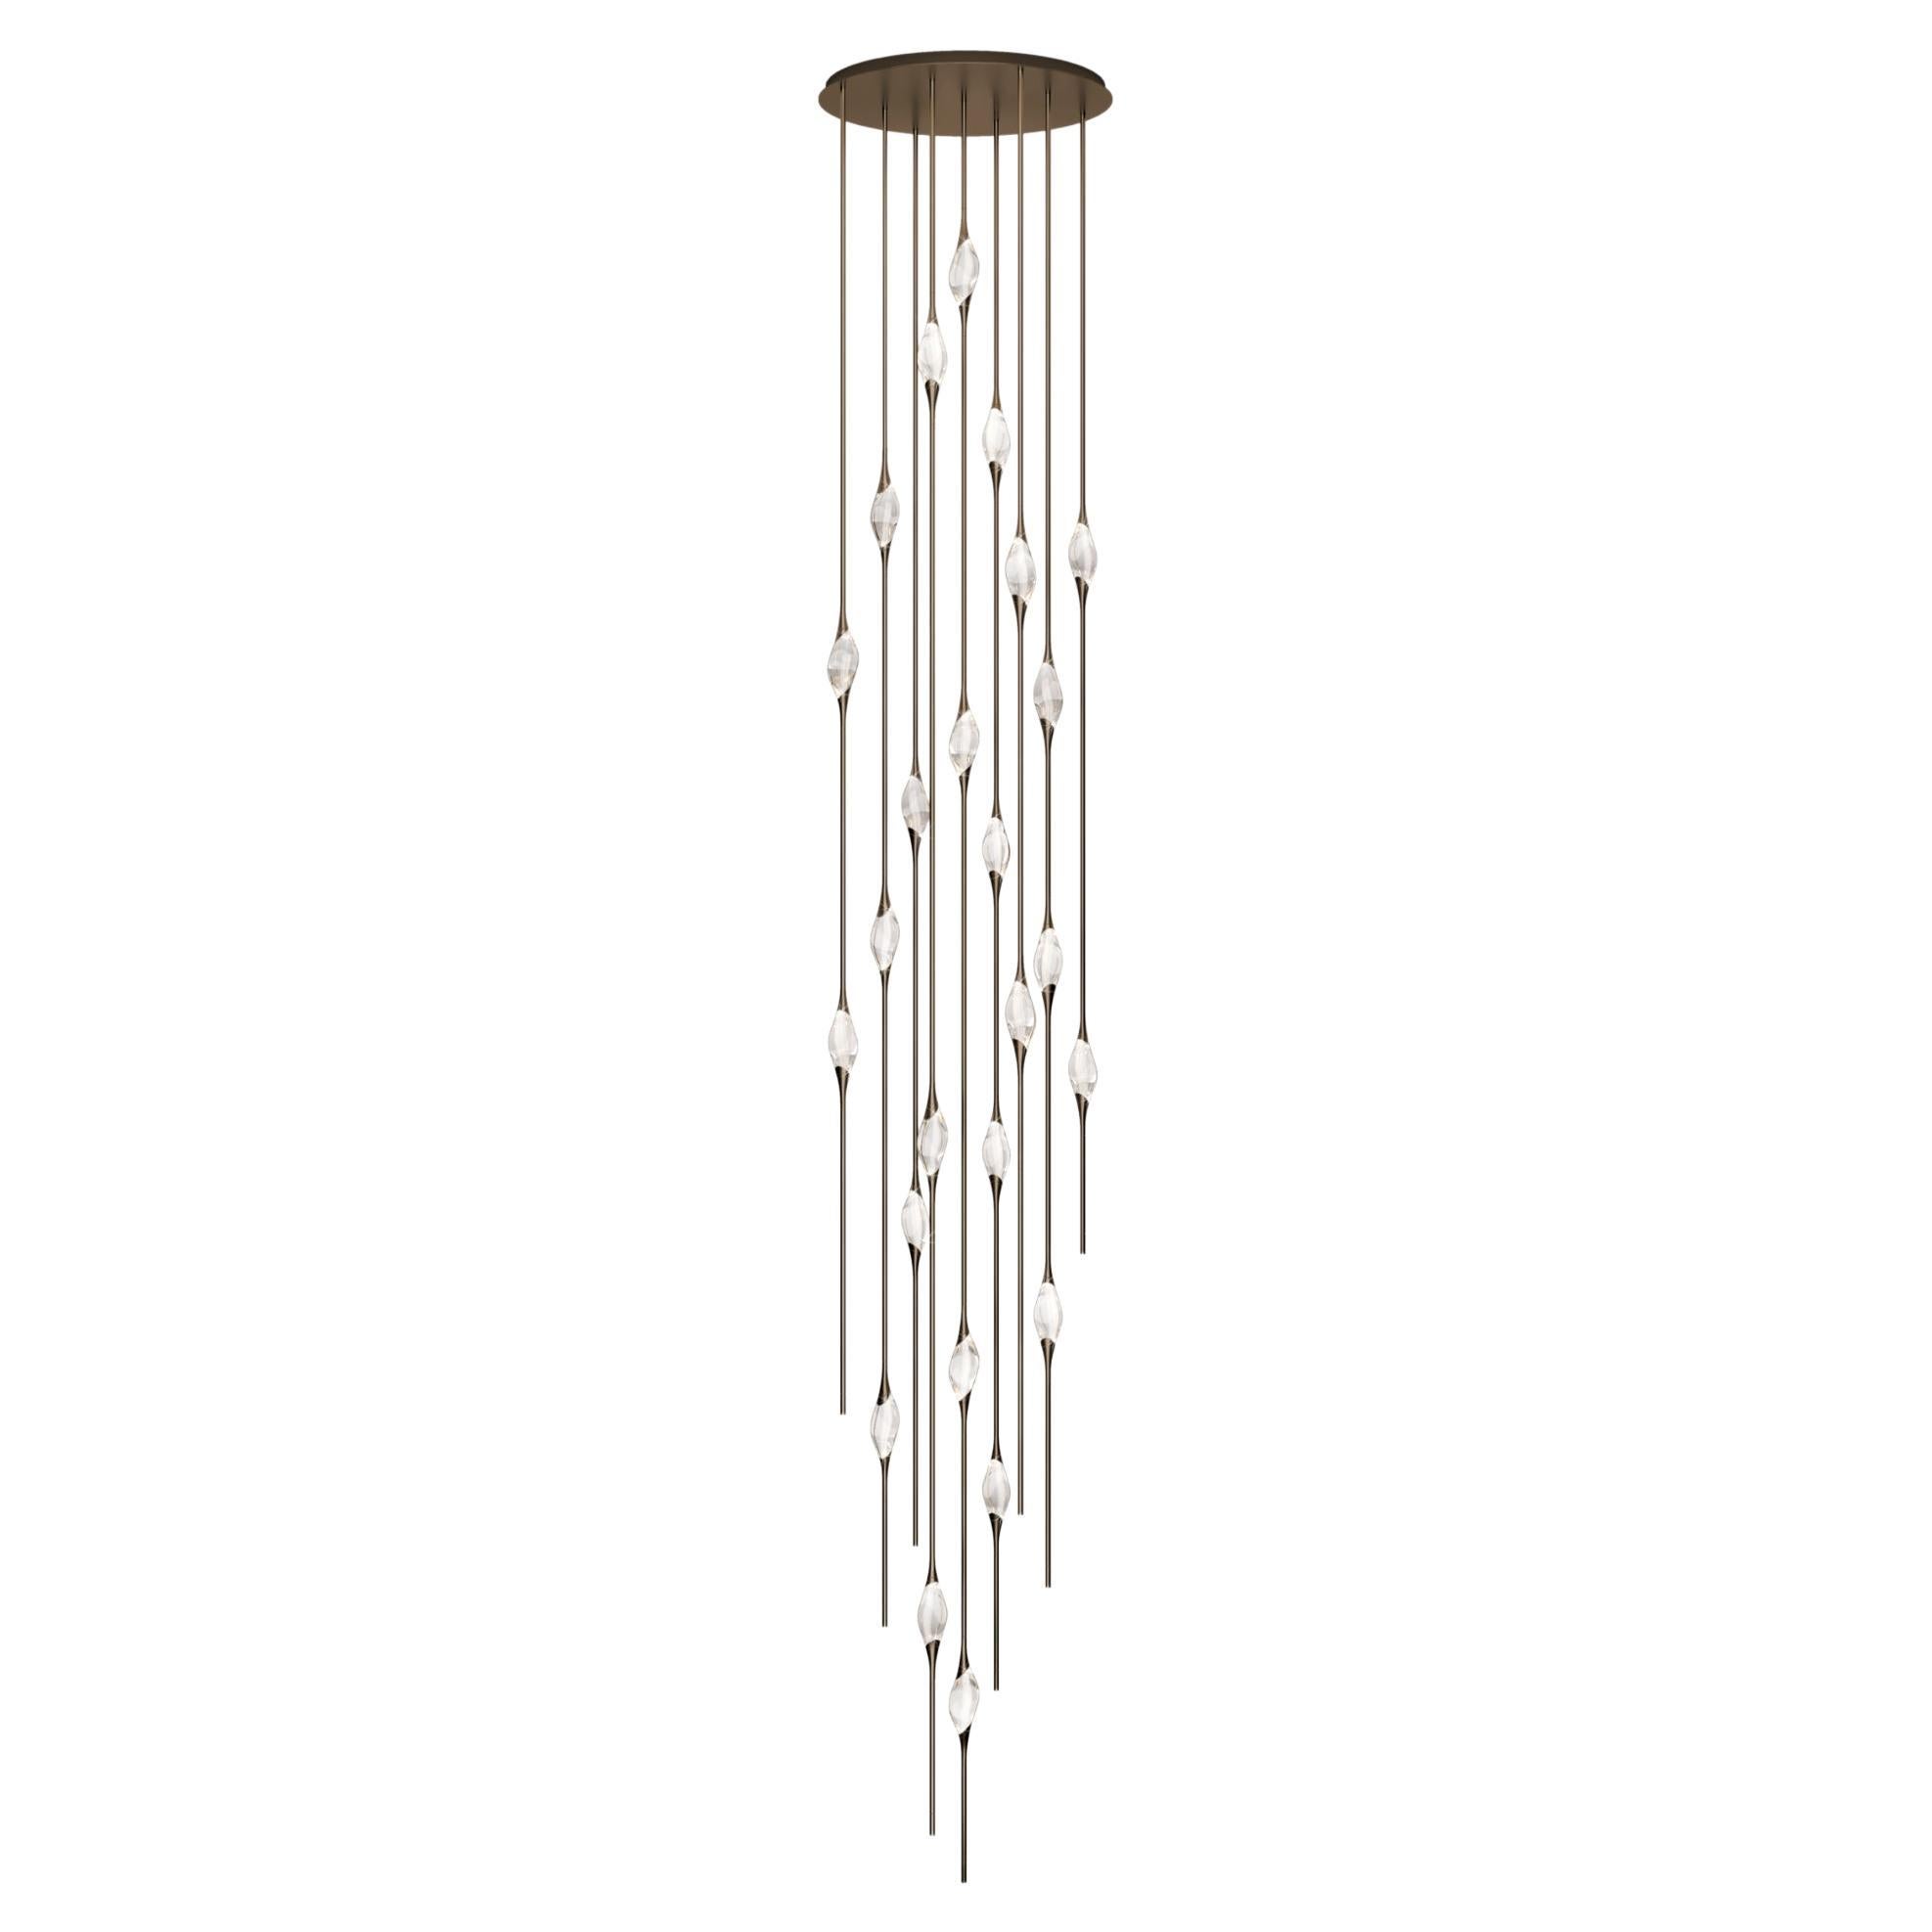 "Il Pezzo 12 Cluster Chandelier" - height 550cm/216" - bronze - crystal - LEDs